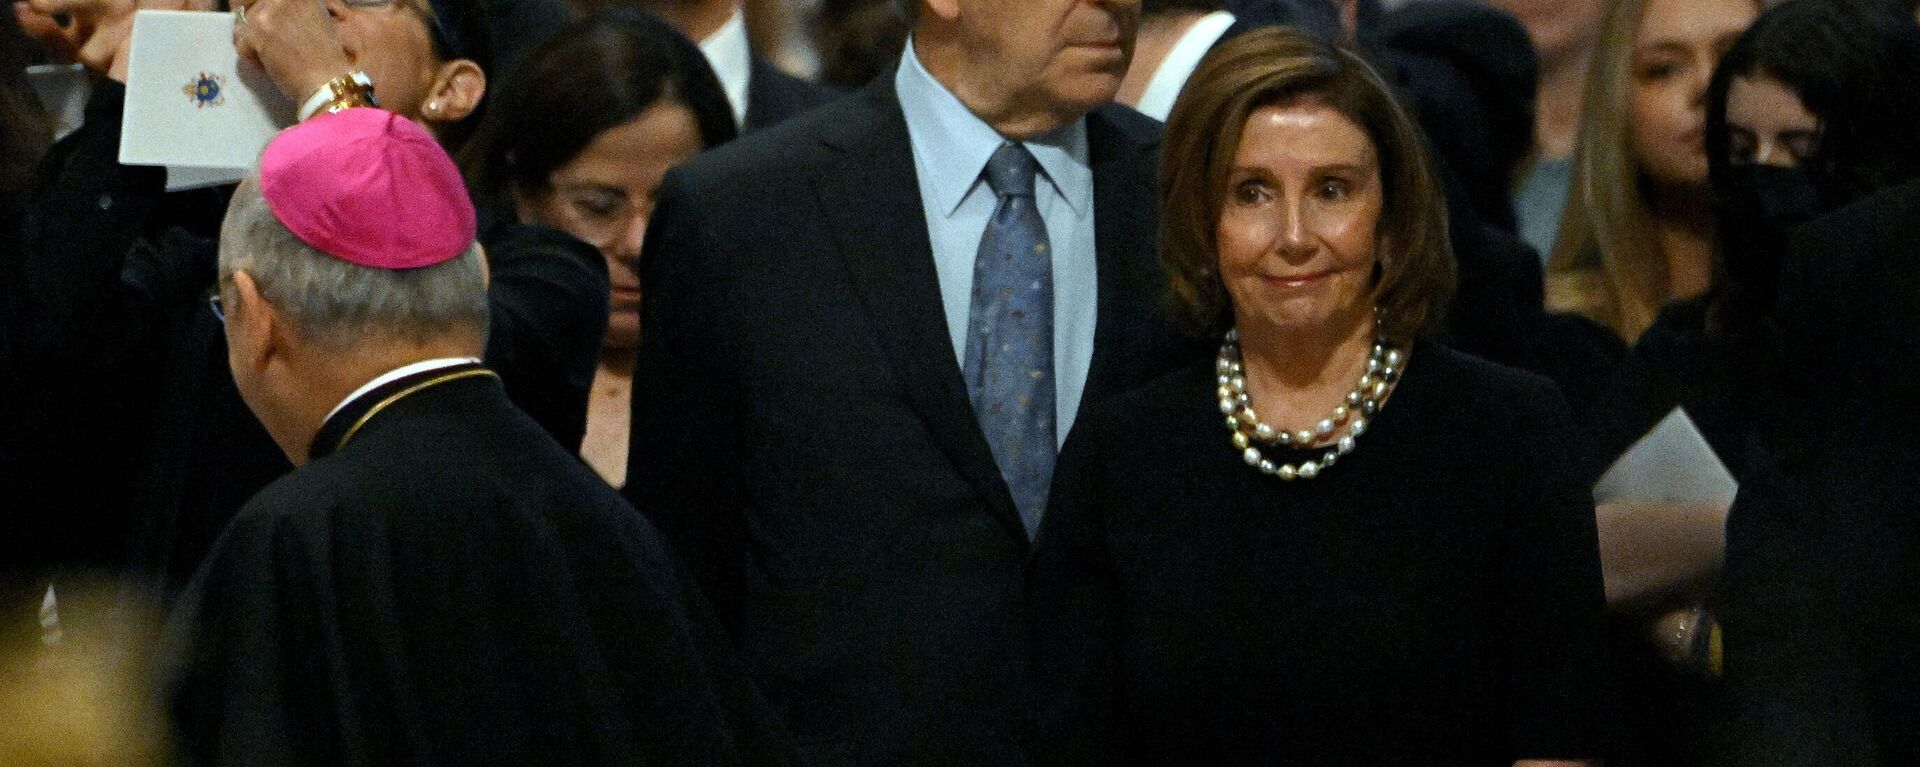 U.S. Speaker of the House Nancy Pelosi (R) attends a mass for the Solemnity of Saints Peter and Paul led by the pope on June 29, 2022 at St Peter's basilica - Sputnik International, 1920, 03.08.2022